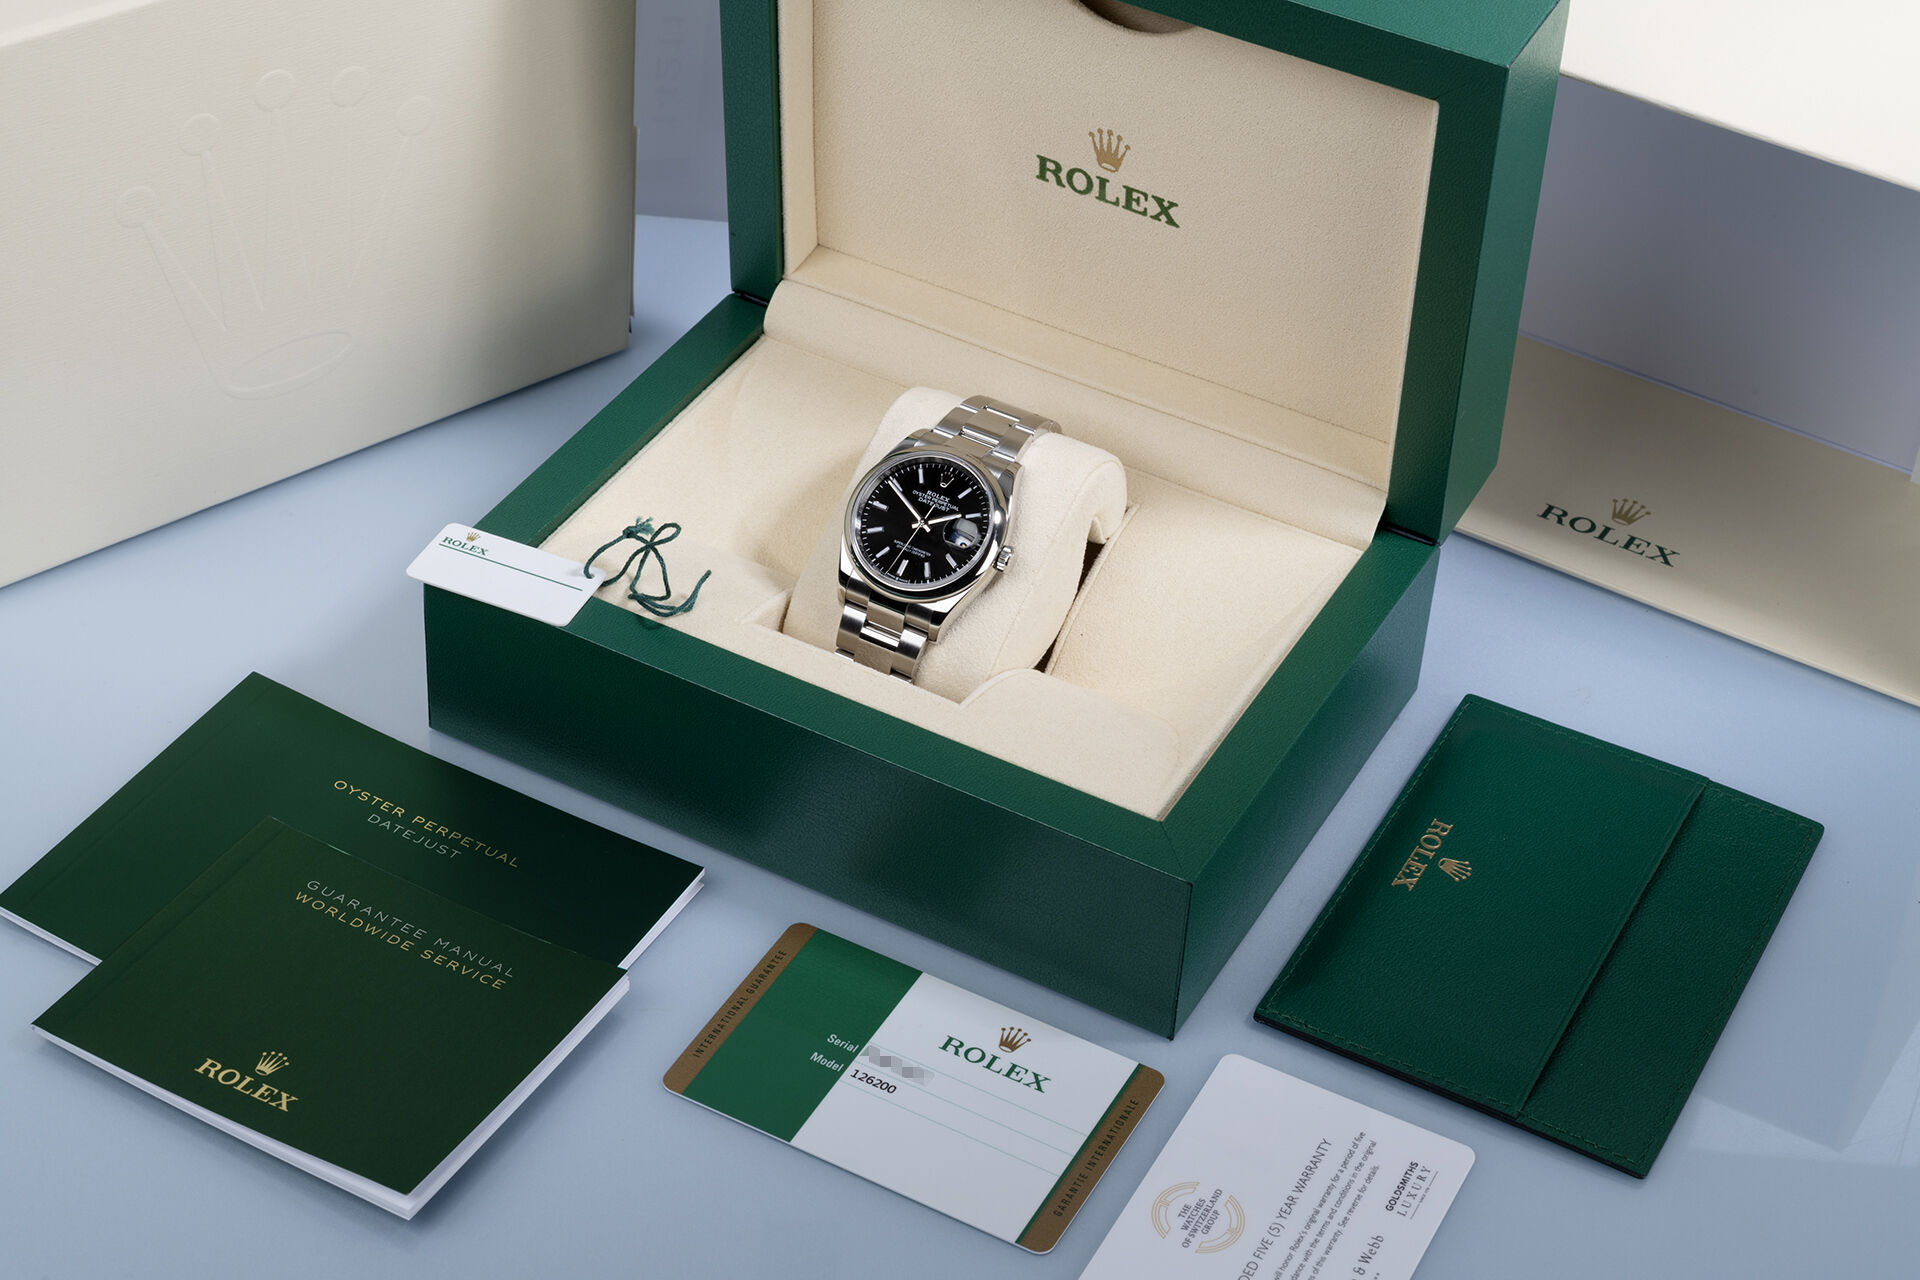 Rolex Datejust 36 Watches | ref 126200-0003 | Box & Certificate | The ...